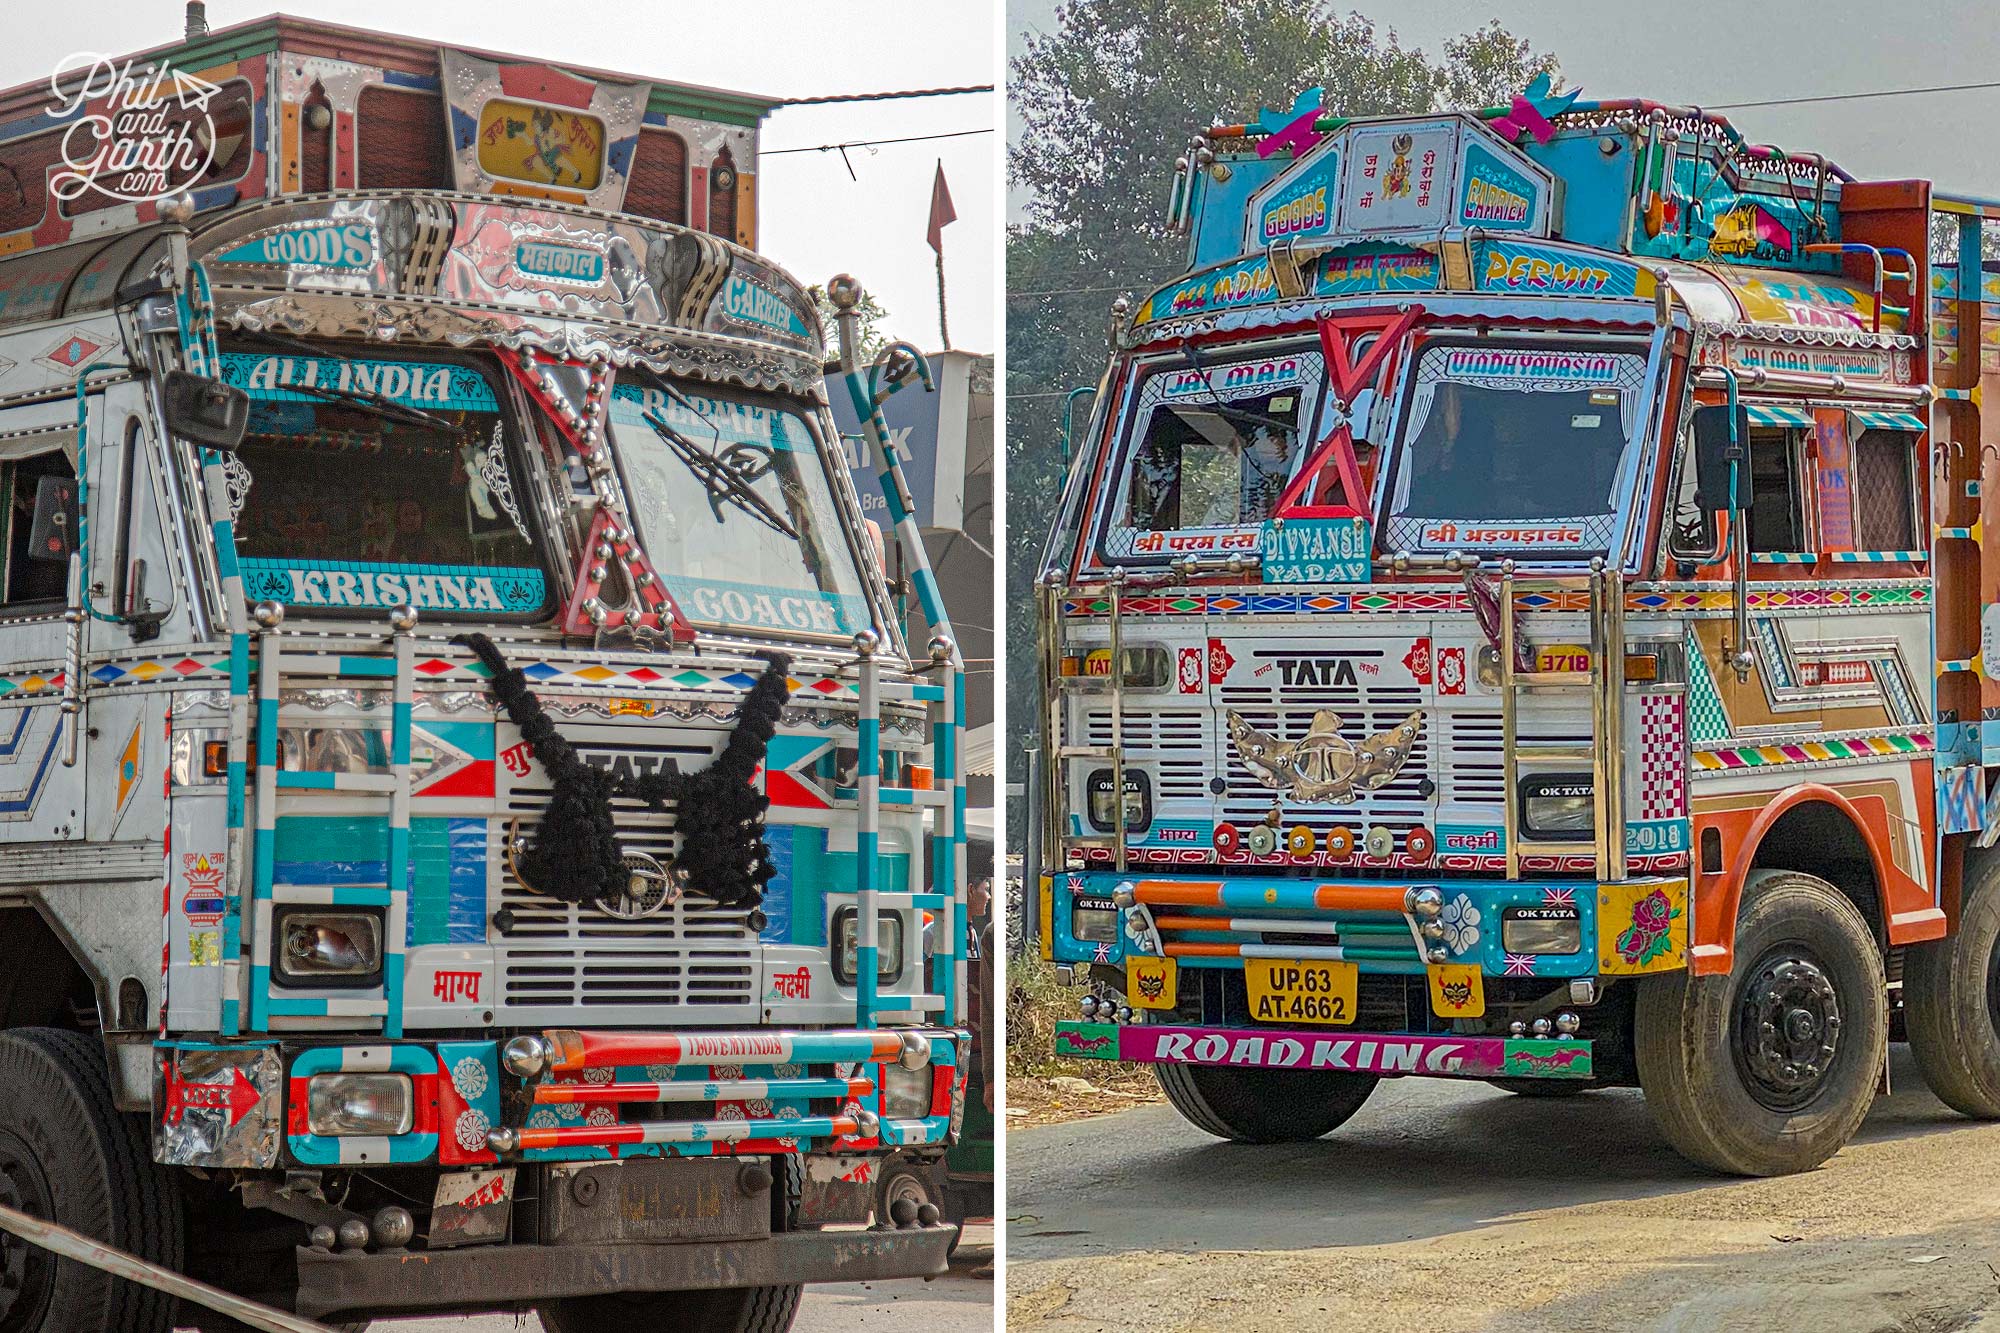 We loved all the highly decorated lorries and trucks in India